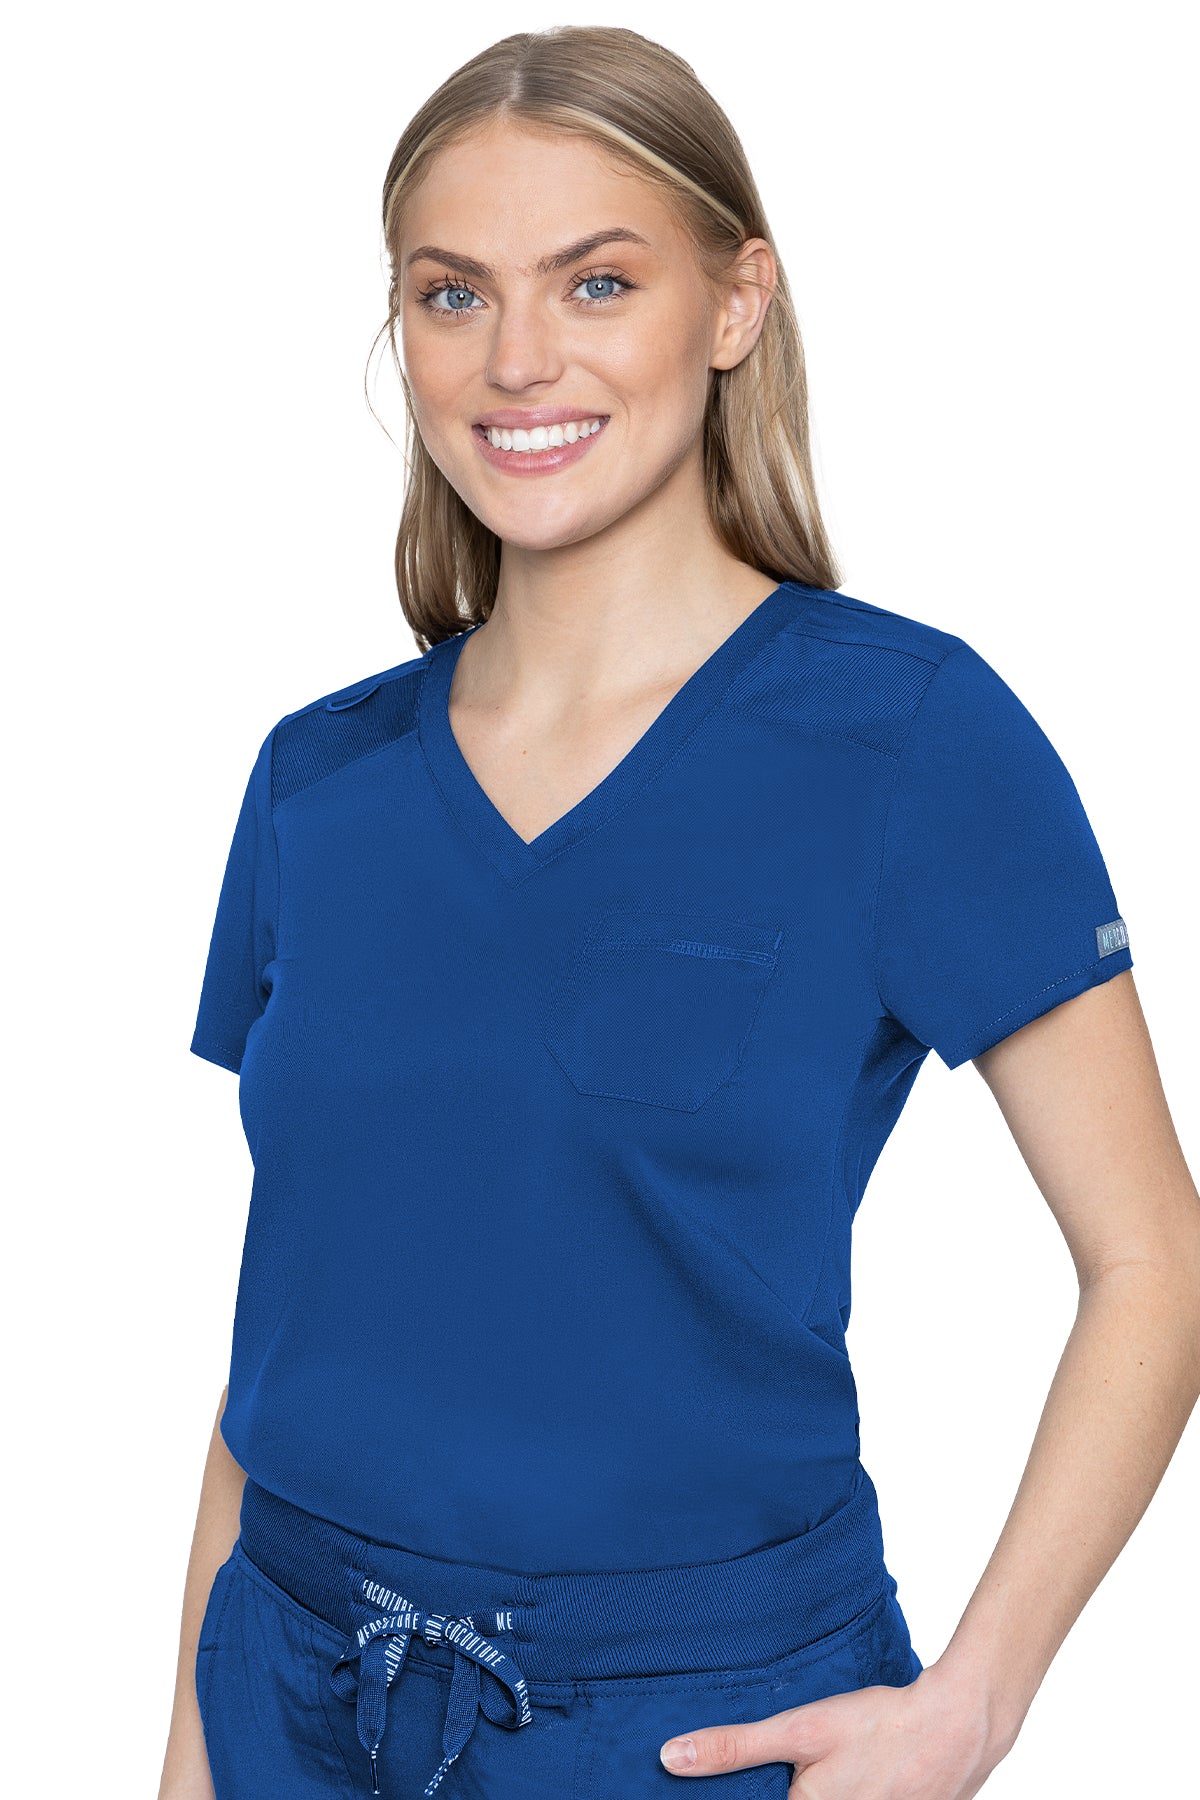 TOUCH-V-NECK-ONE-POCKET-TOP-ROYAL-MED-COUTURE-SCRUB-ENVY